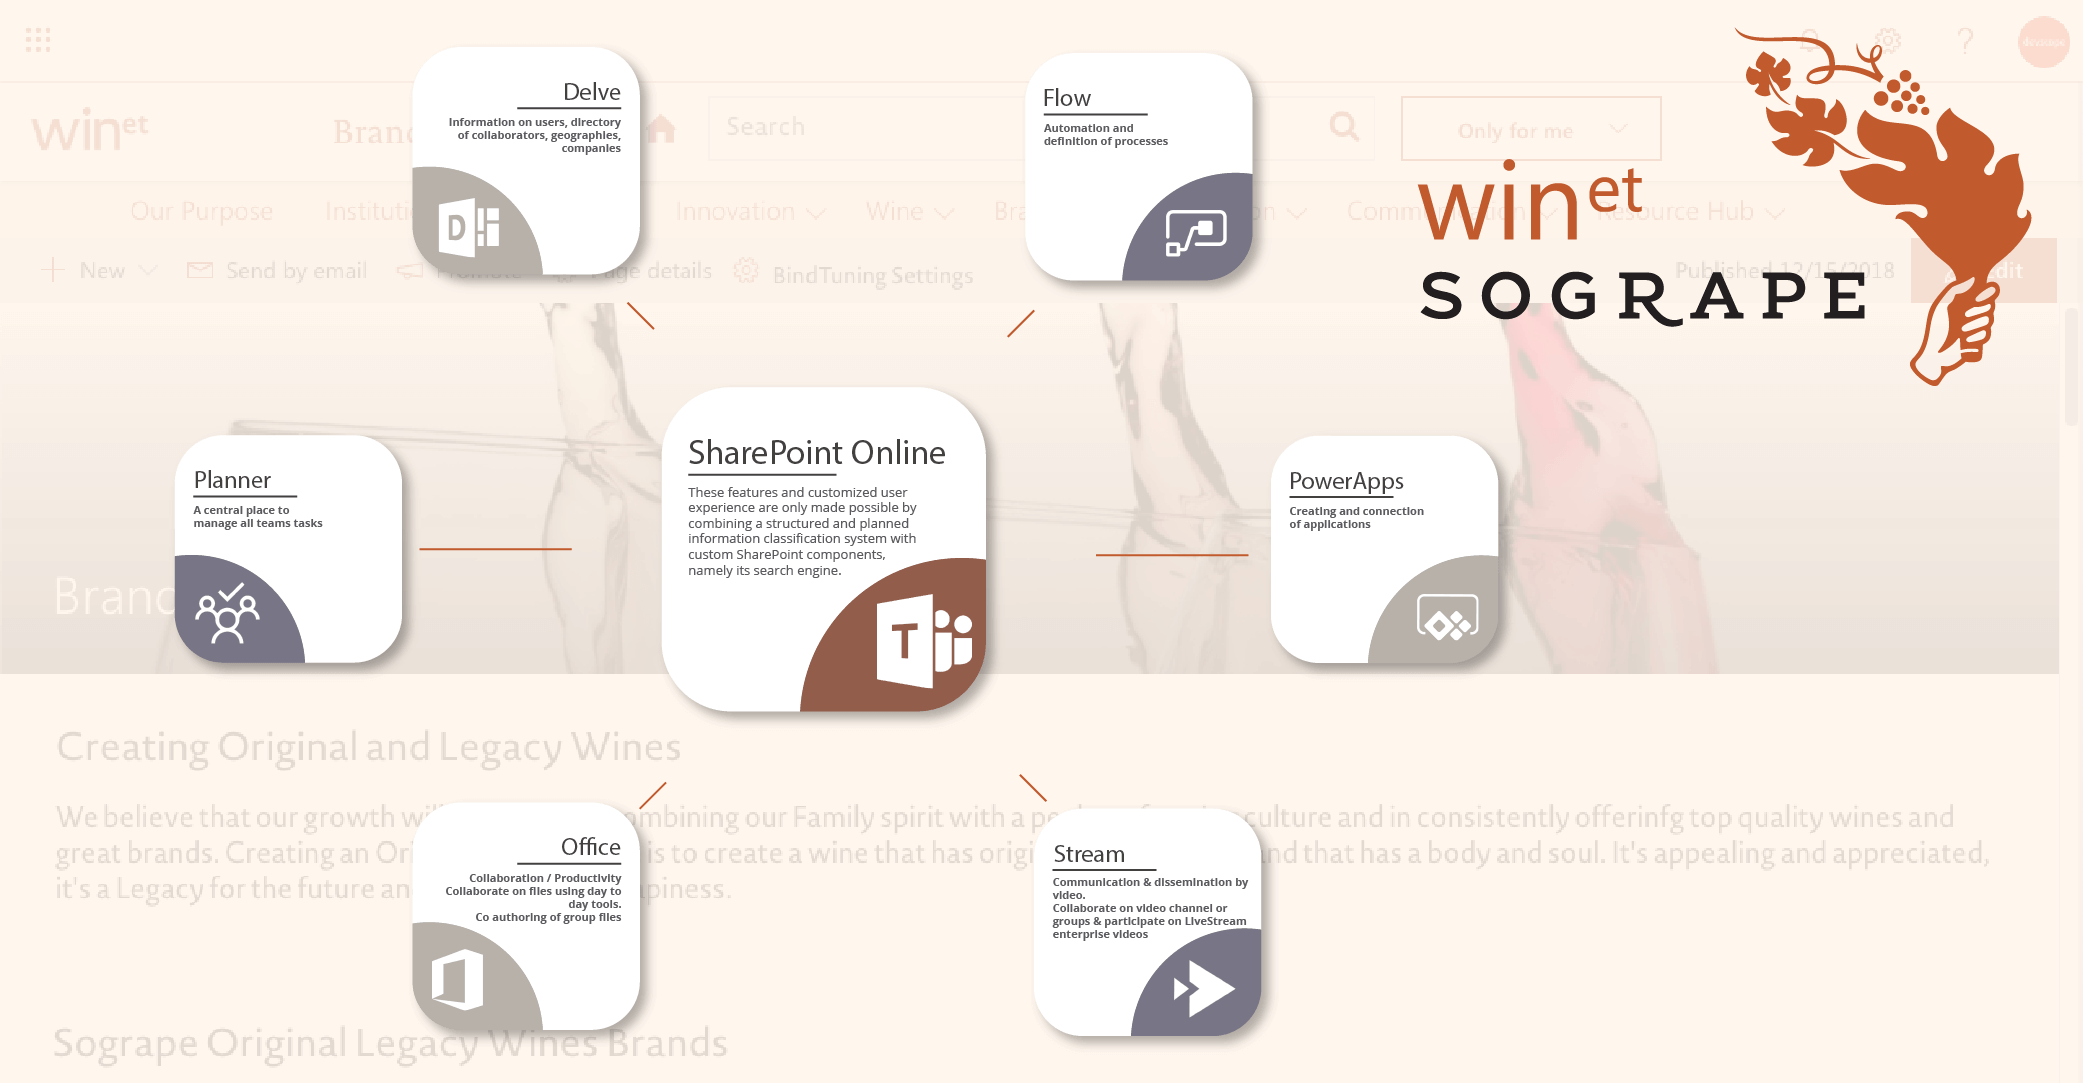 WINet takes full advantage of Office 365's extensive list of productivity features